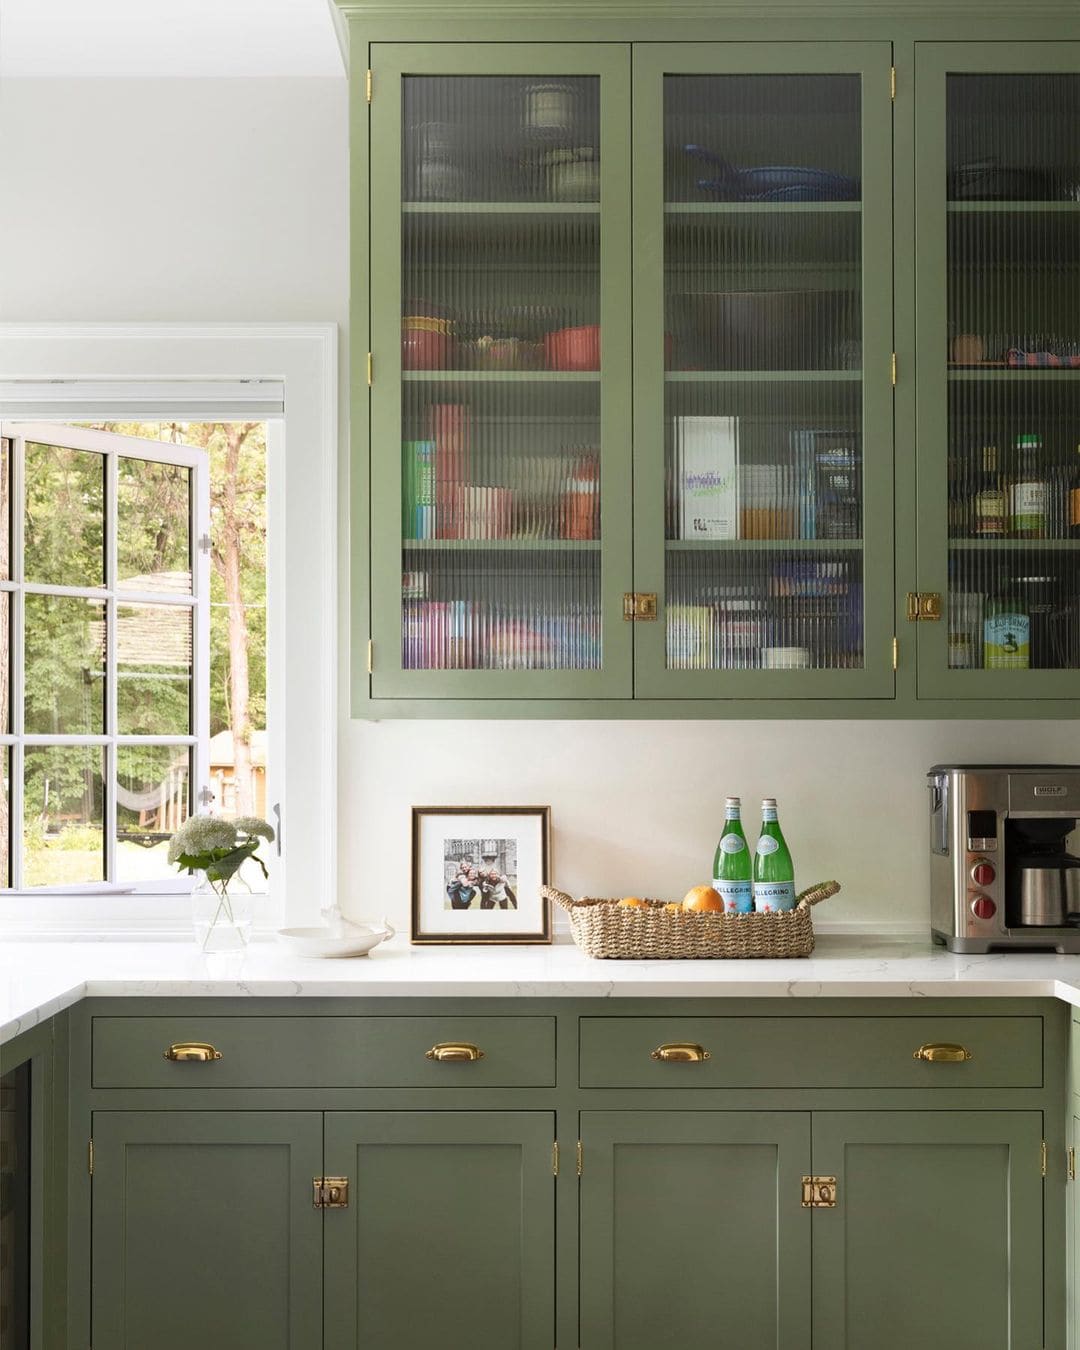 Kitchen featuring green cabinets in trendy decor style featured in "Timeless vs. Trendy Decor" 